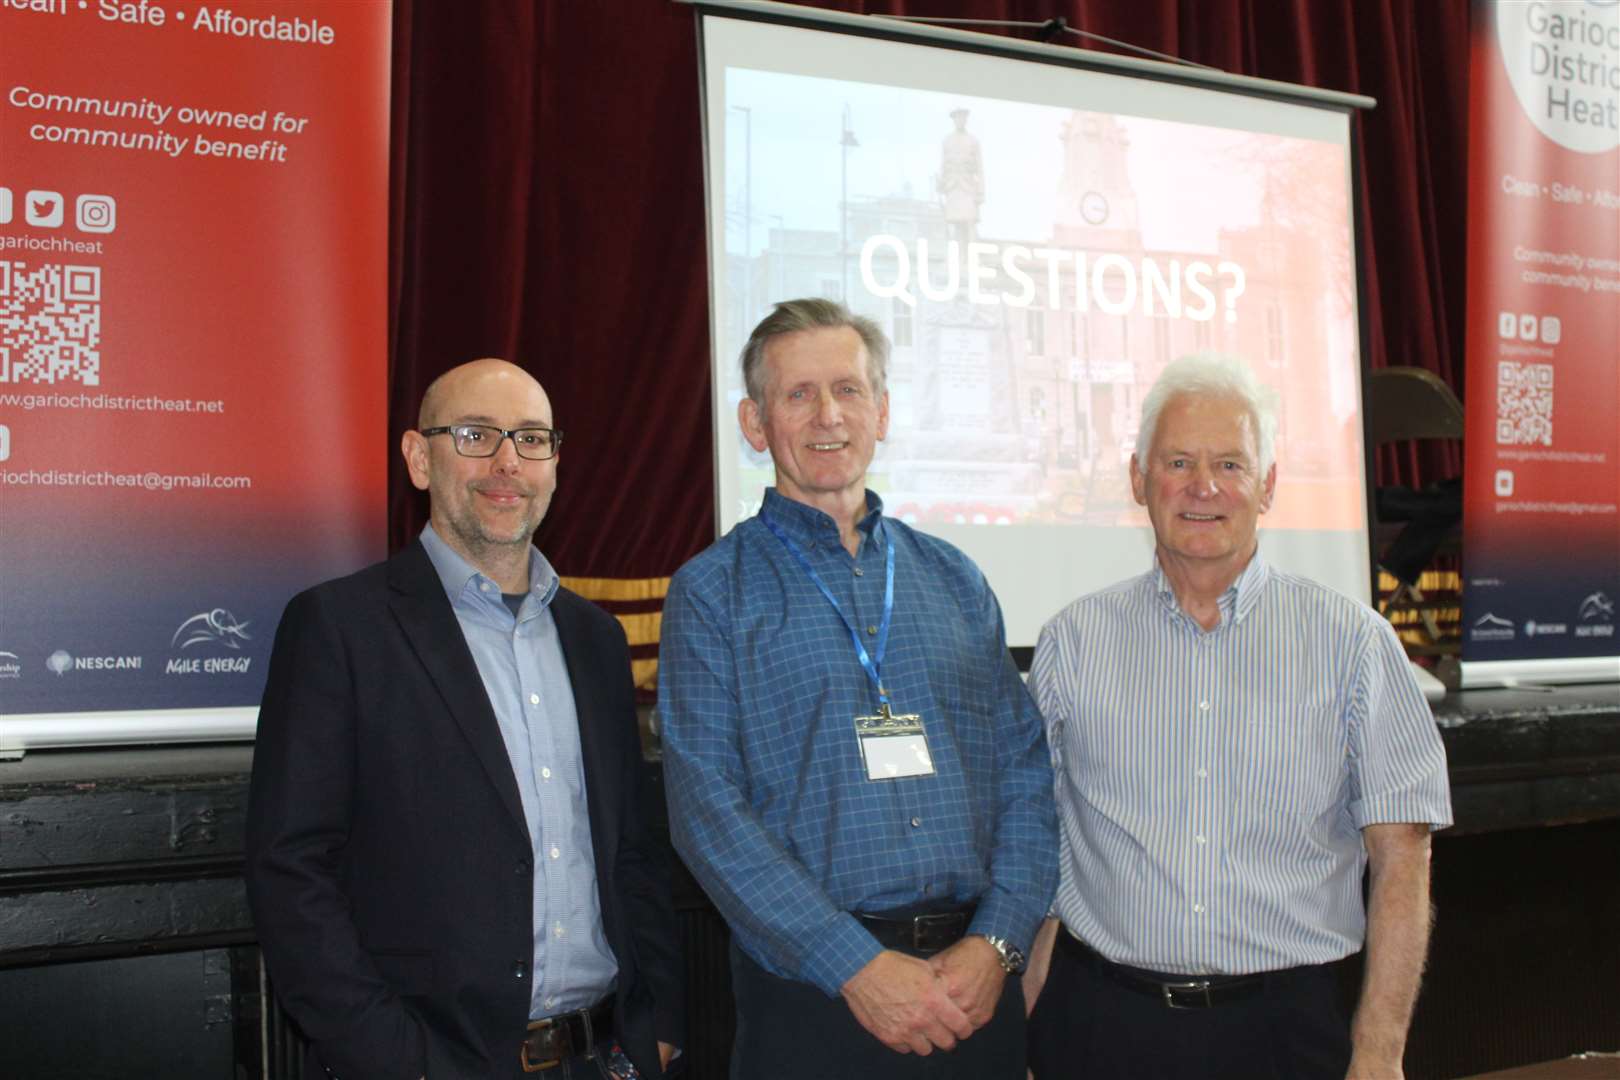 Speakers (left) Tom Nockolds, George Niblock and Ian Booth who presented Garioch District Heat meeting in Inverurie town hall on Saturday. Picture: Griselda McGregor